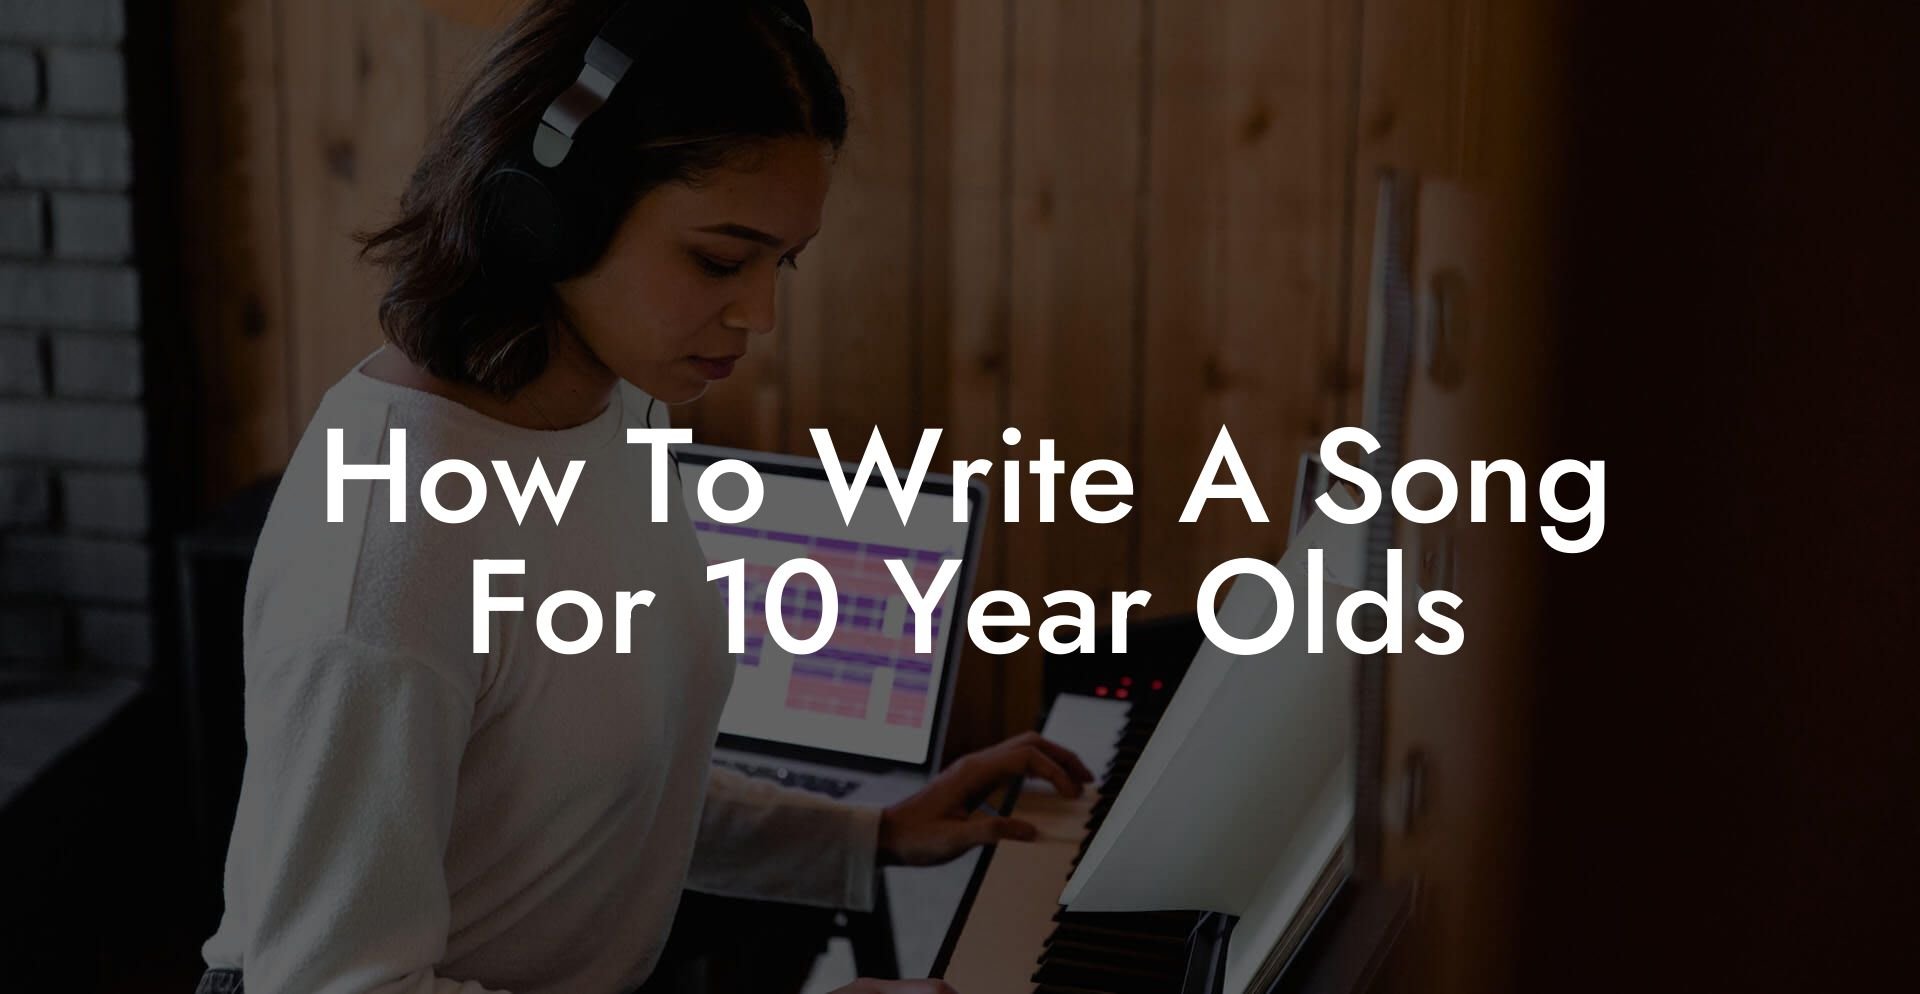 how to write a song for 10 year olds lyric assistant